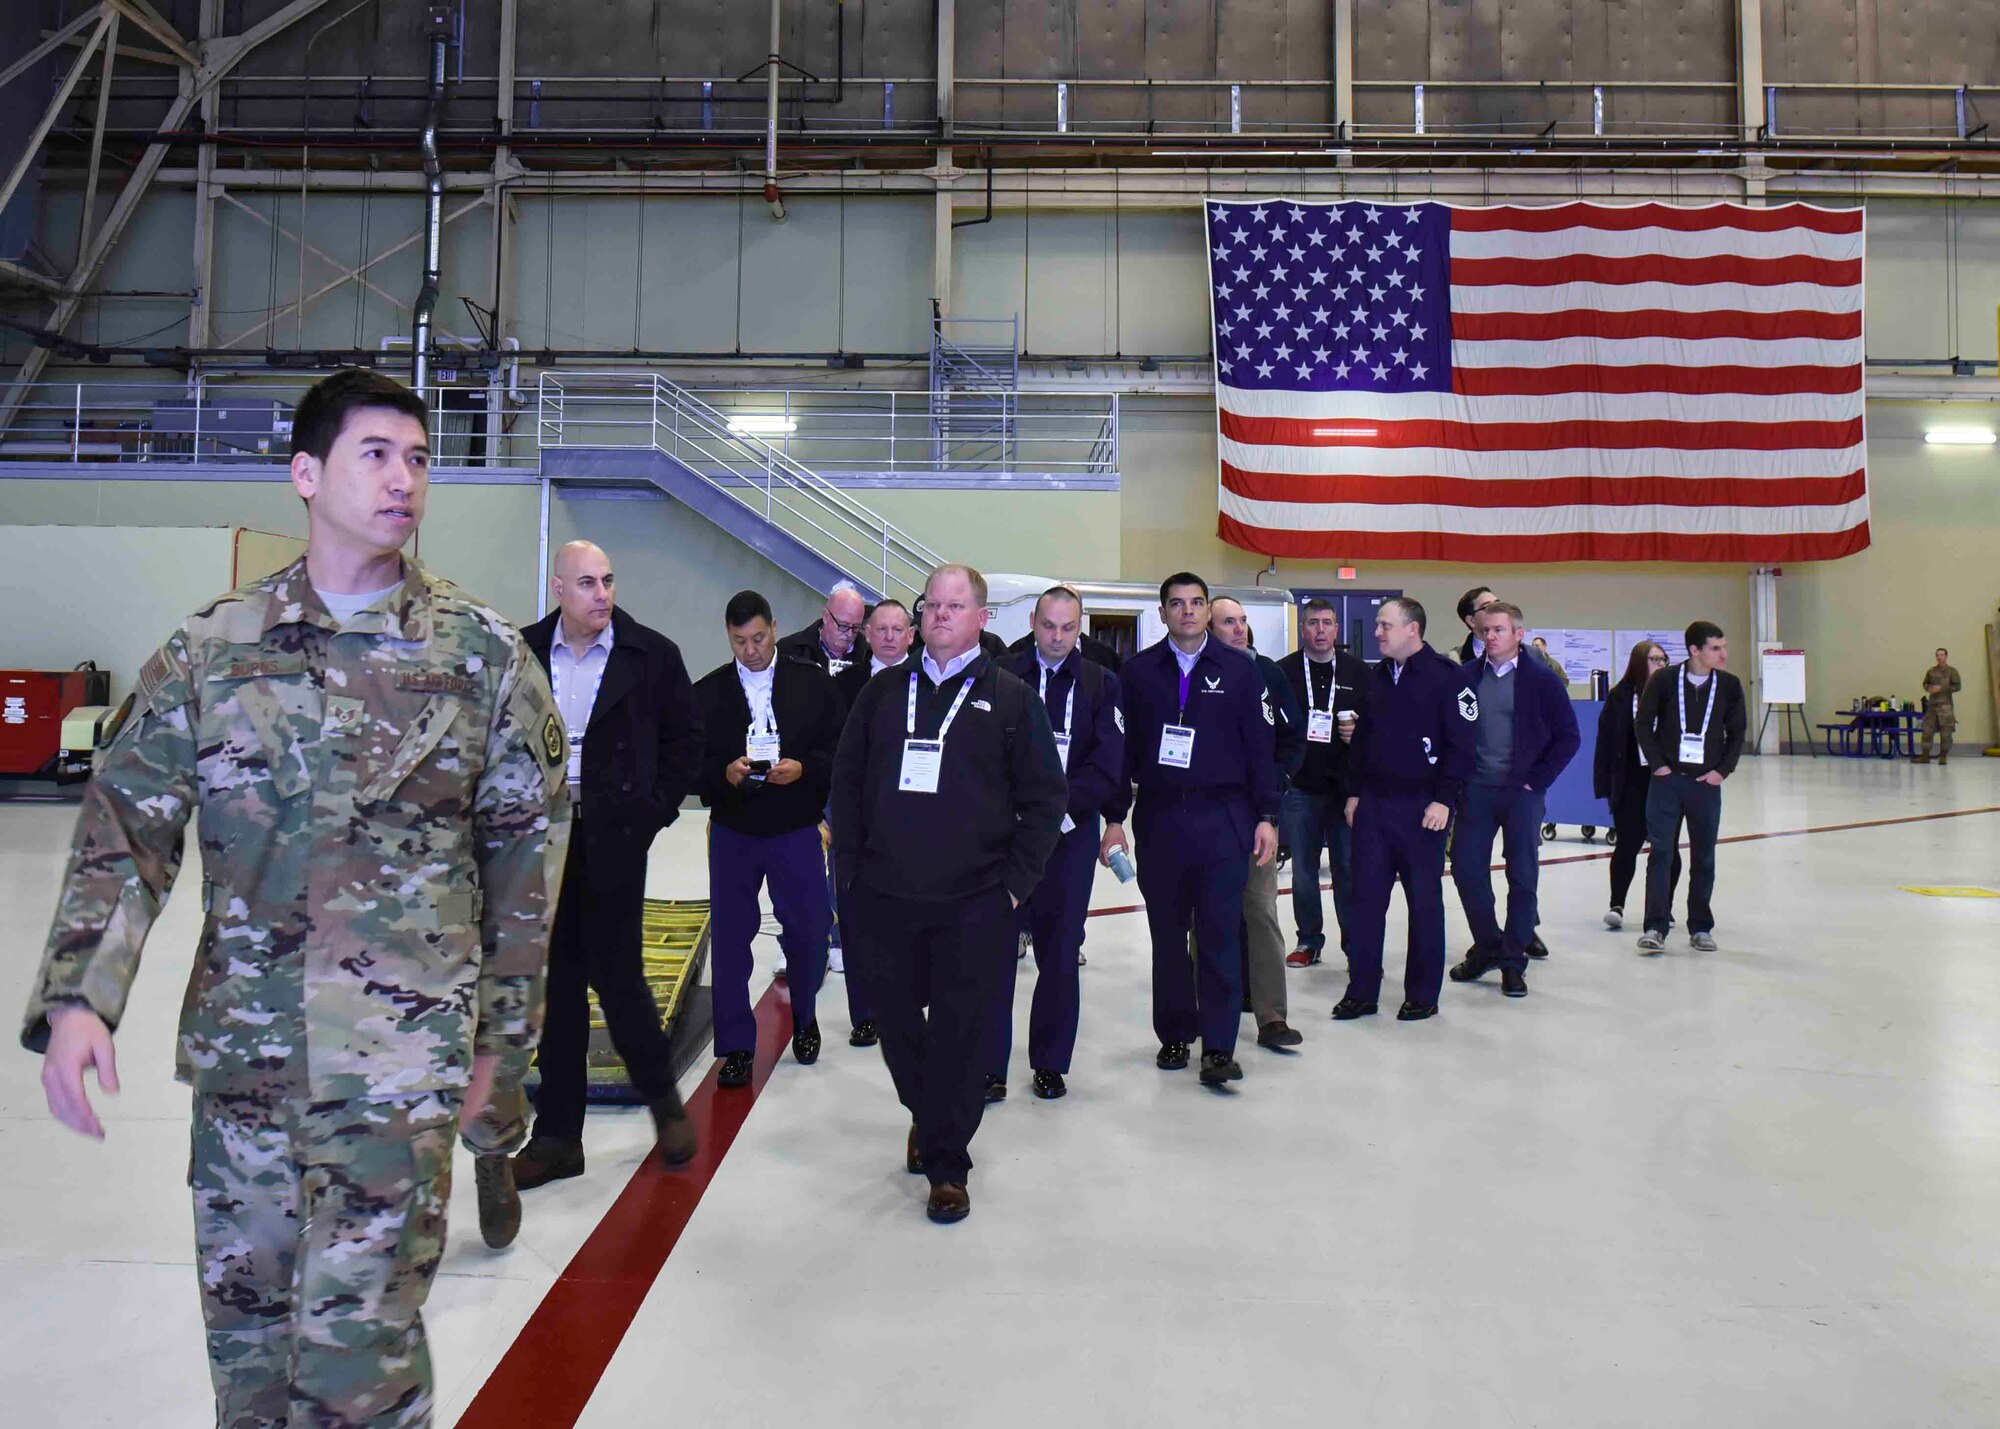 A 92nd Air Force Aircraft Maintenance Squadron Airman provides a tour to members from the Department of Defense Maintenance Symposium at Fairchild Air Force Base, Washington, Dec 12, 2019. The tour featured Fairchild’s implemented innovations and processes that save the Air Force man hours and money. (U.S. Air Force photo by Airman 1st Class Kiaundra Miller)